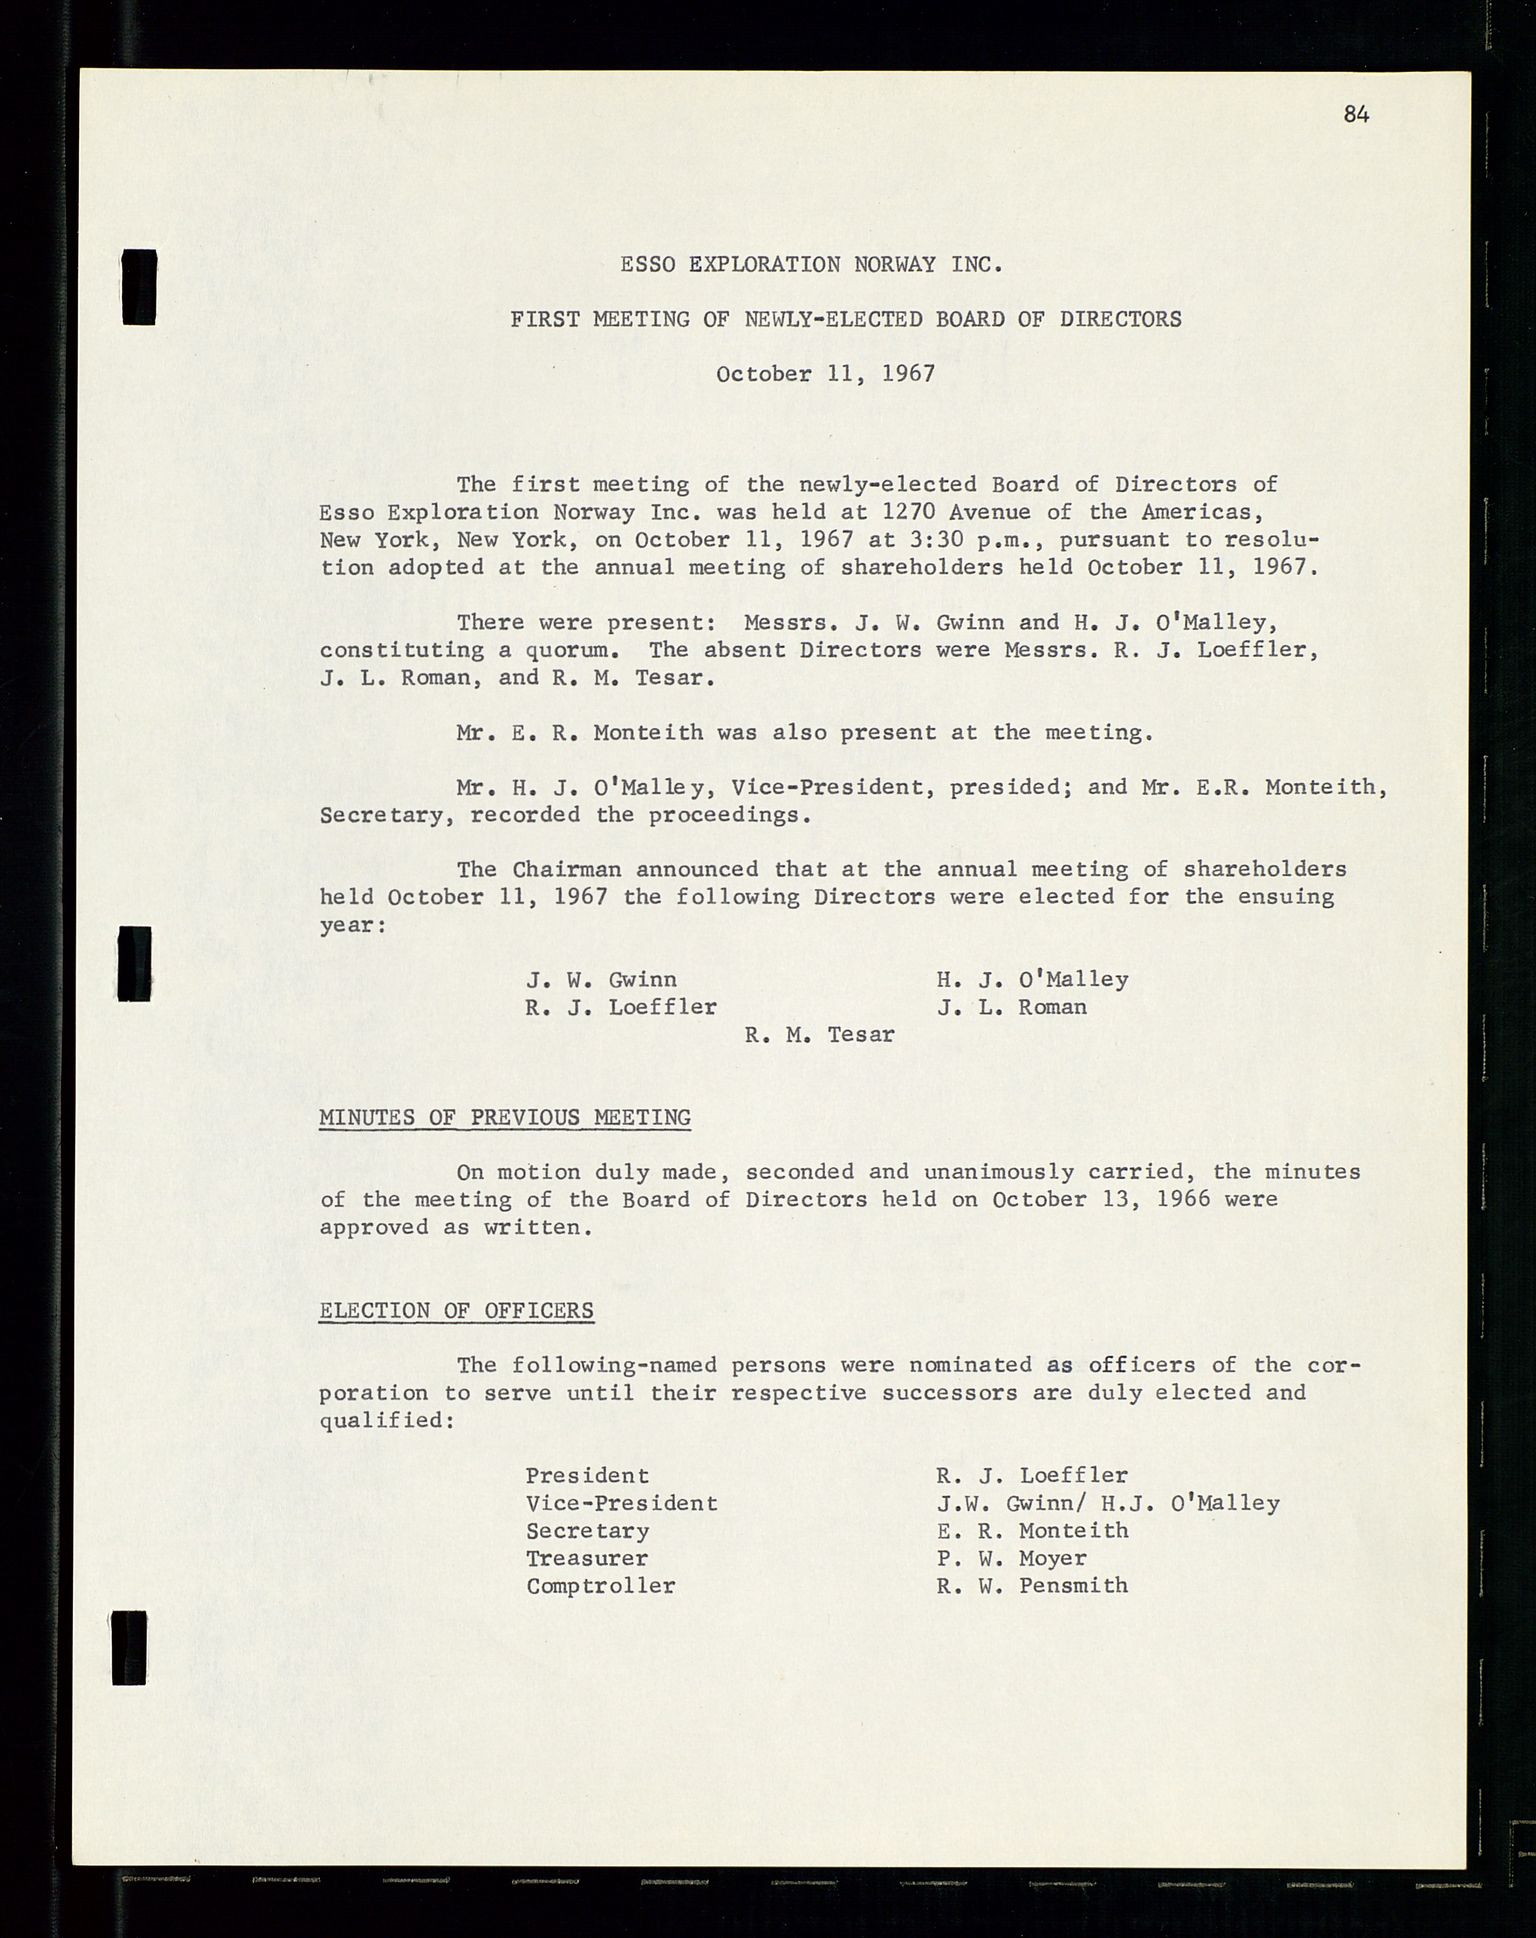 Pa 1512 - Esso Exploration and Production Norway Inc., SAST/A-101917/A/Aa/L0001/0001: Styredokumenter / Corporate records, By-Laws, Board meeting minutes, Incorporations, 1965-1975, s. 84